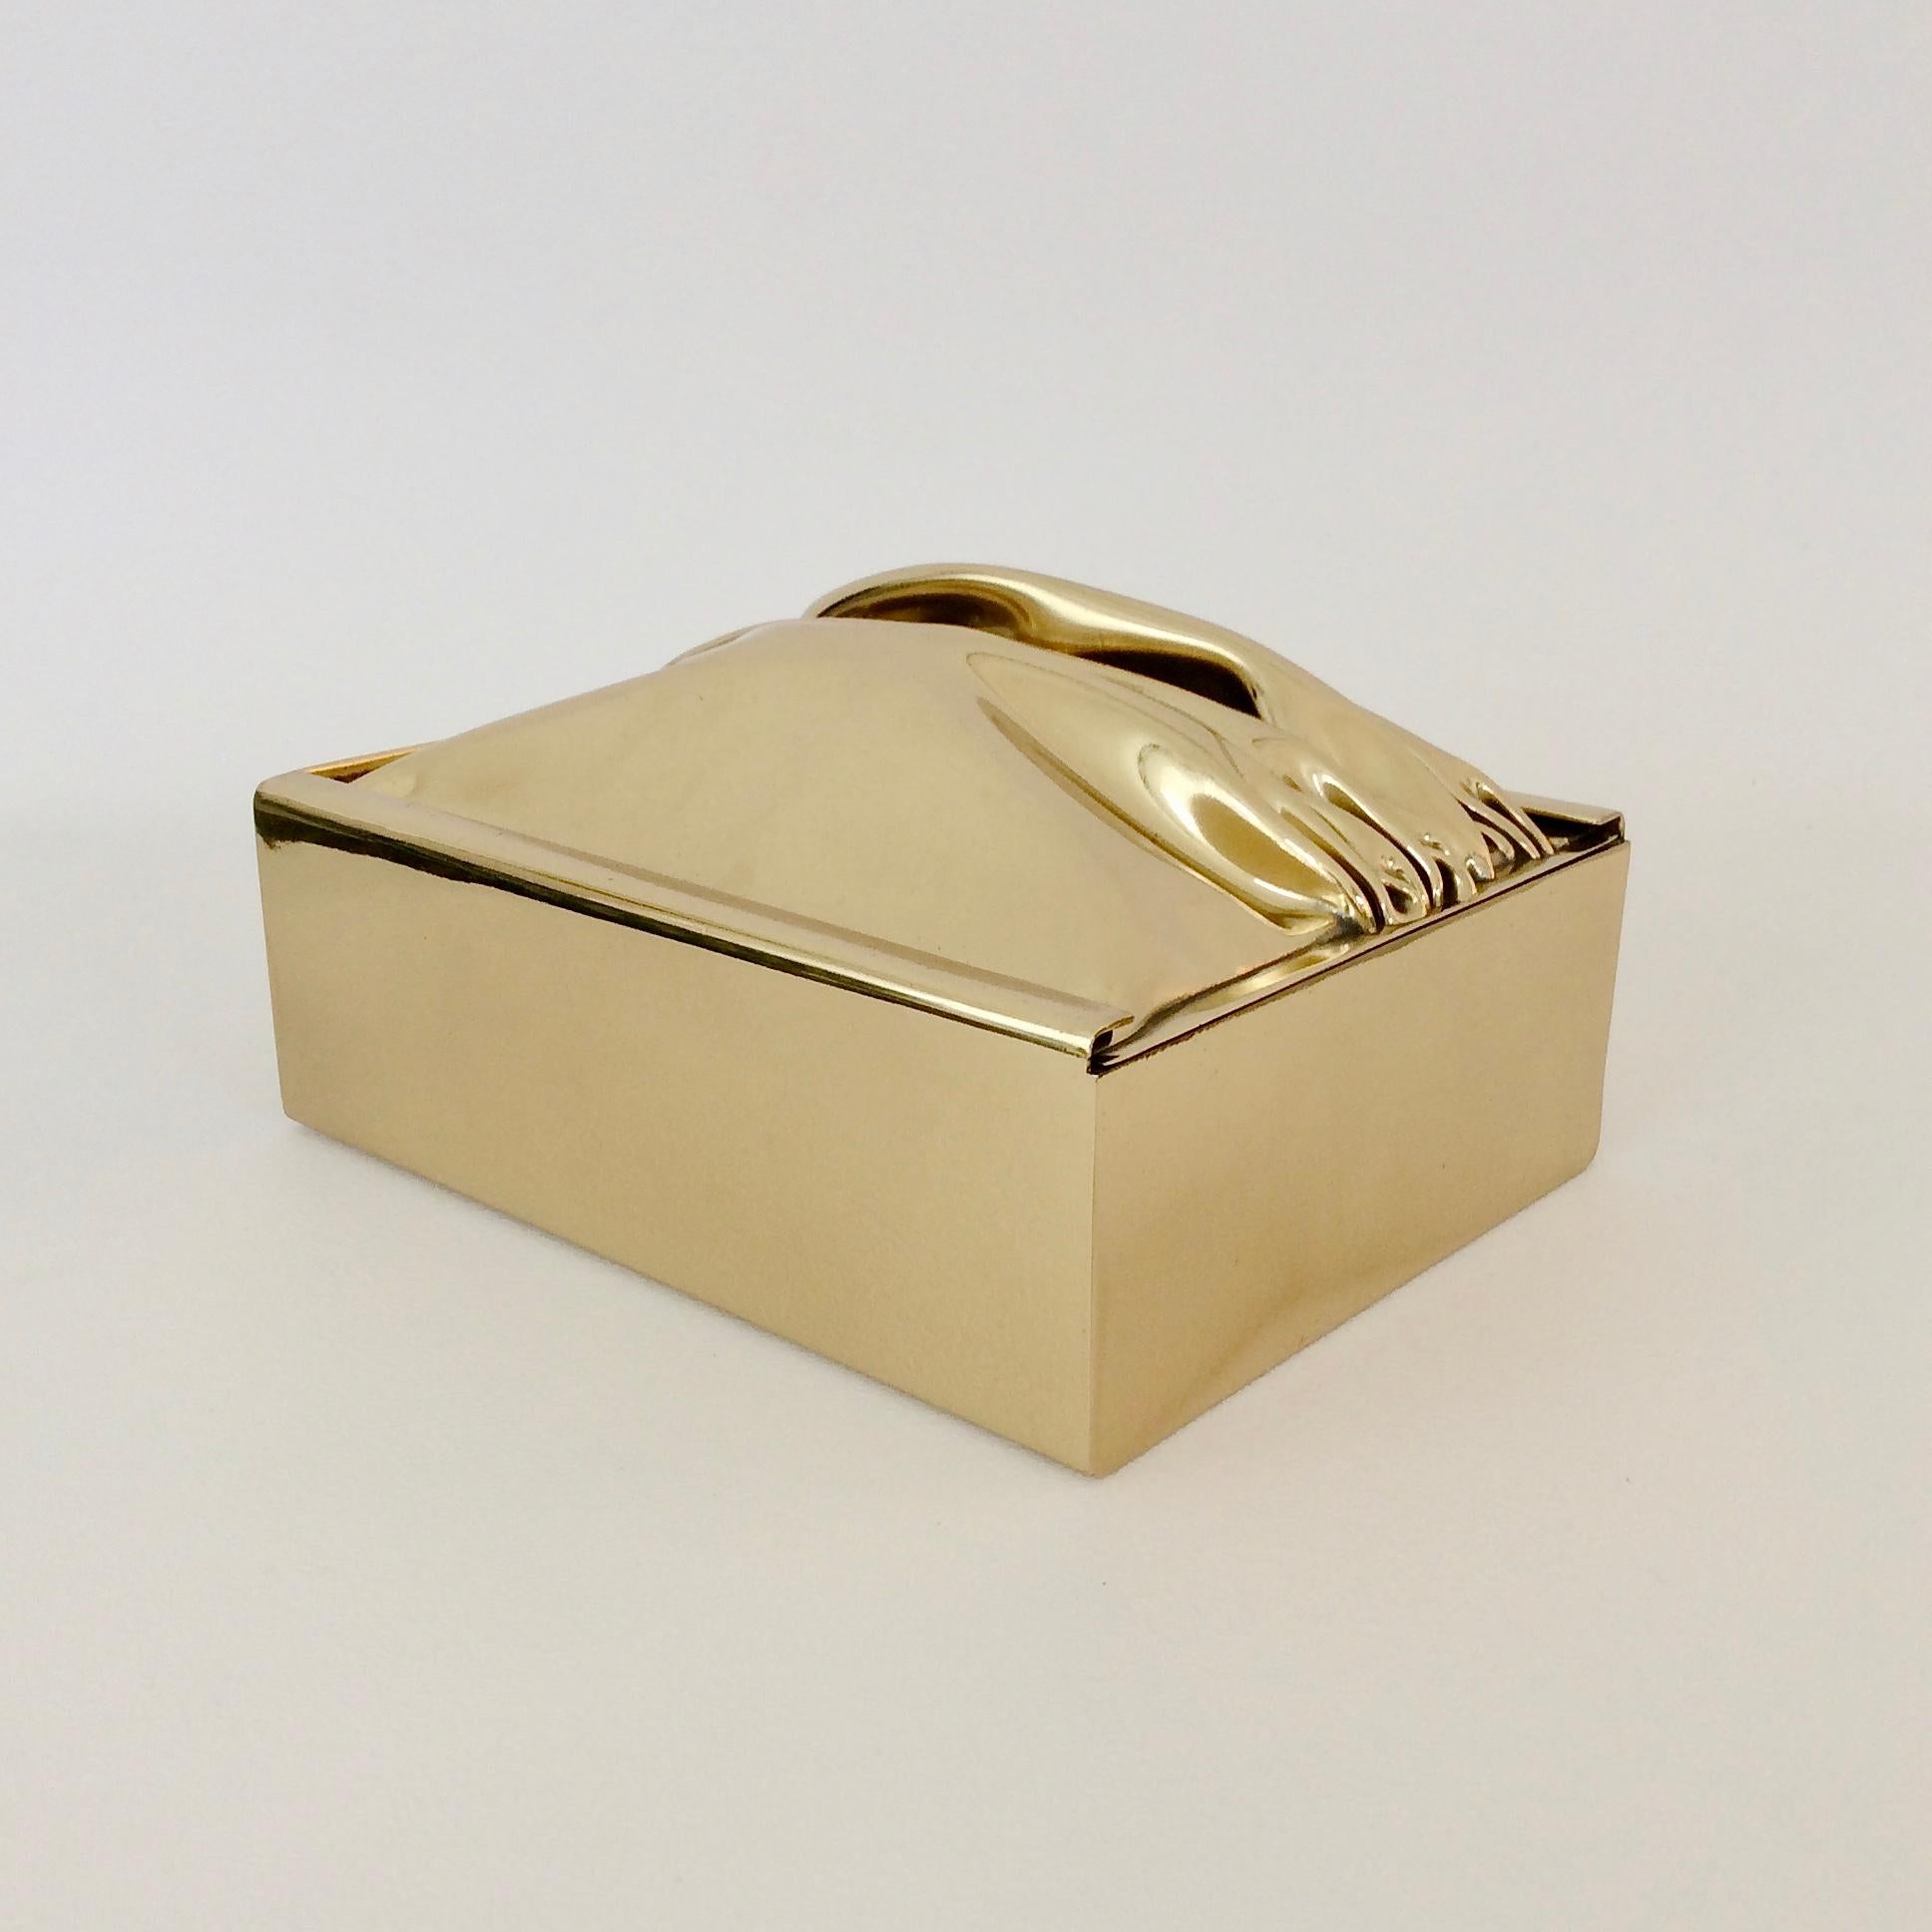 Late 20th Century Jacques Moniquet Polished Brass Box for Cheret, circa 1970, France